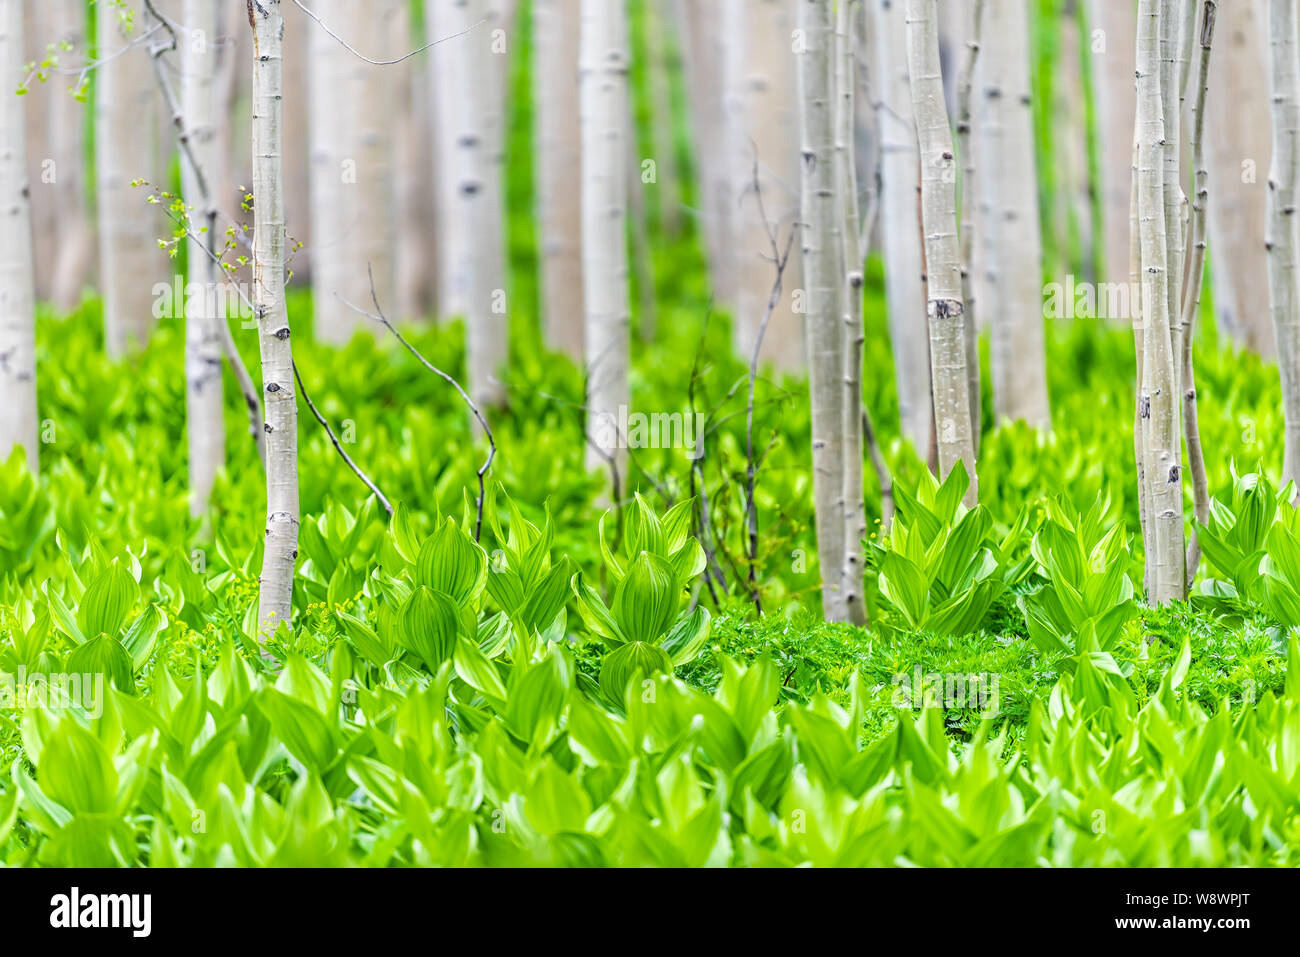 Aspen forest trees pattern in summer with Yellow lady's slipper plants in Snodgrass trail in Mount Crested Butte, Colorado in National Forest park Stock Photo